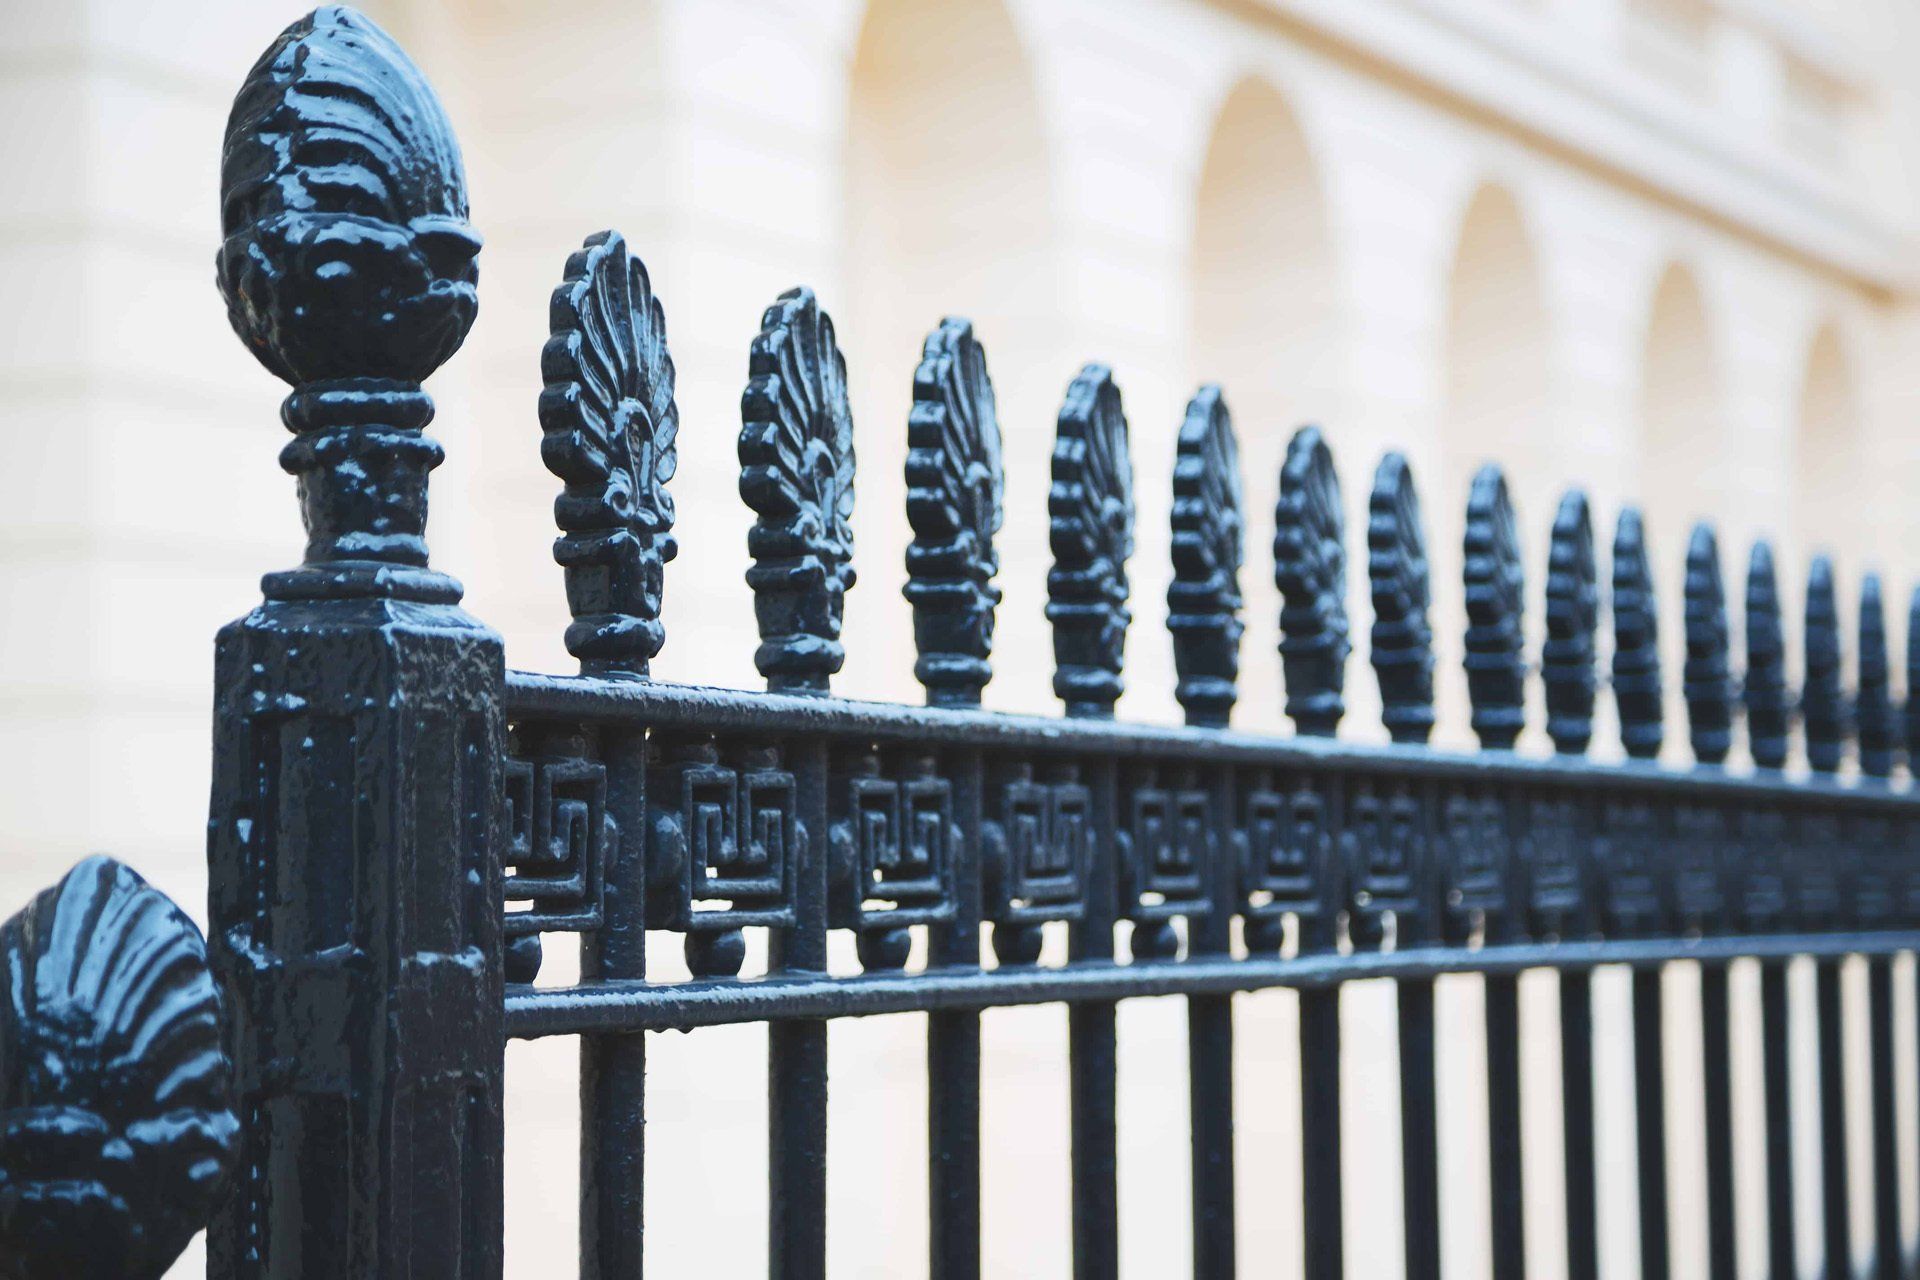 Wrought iron fencing